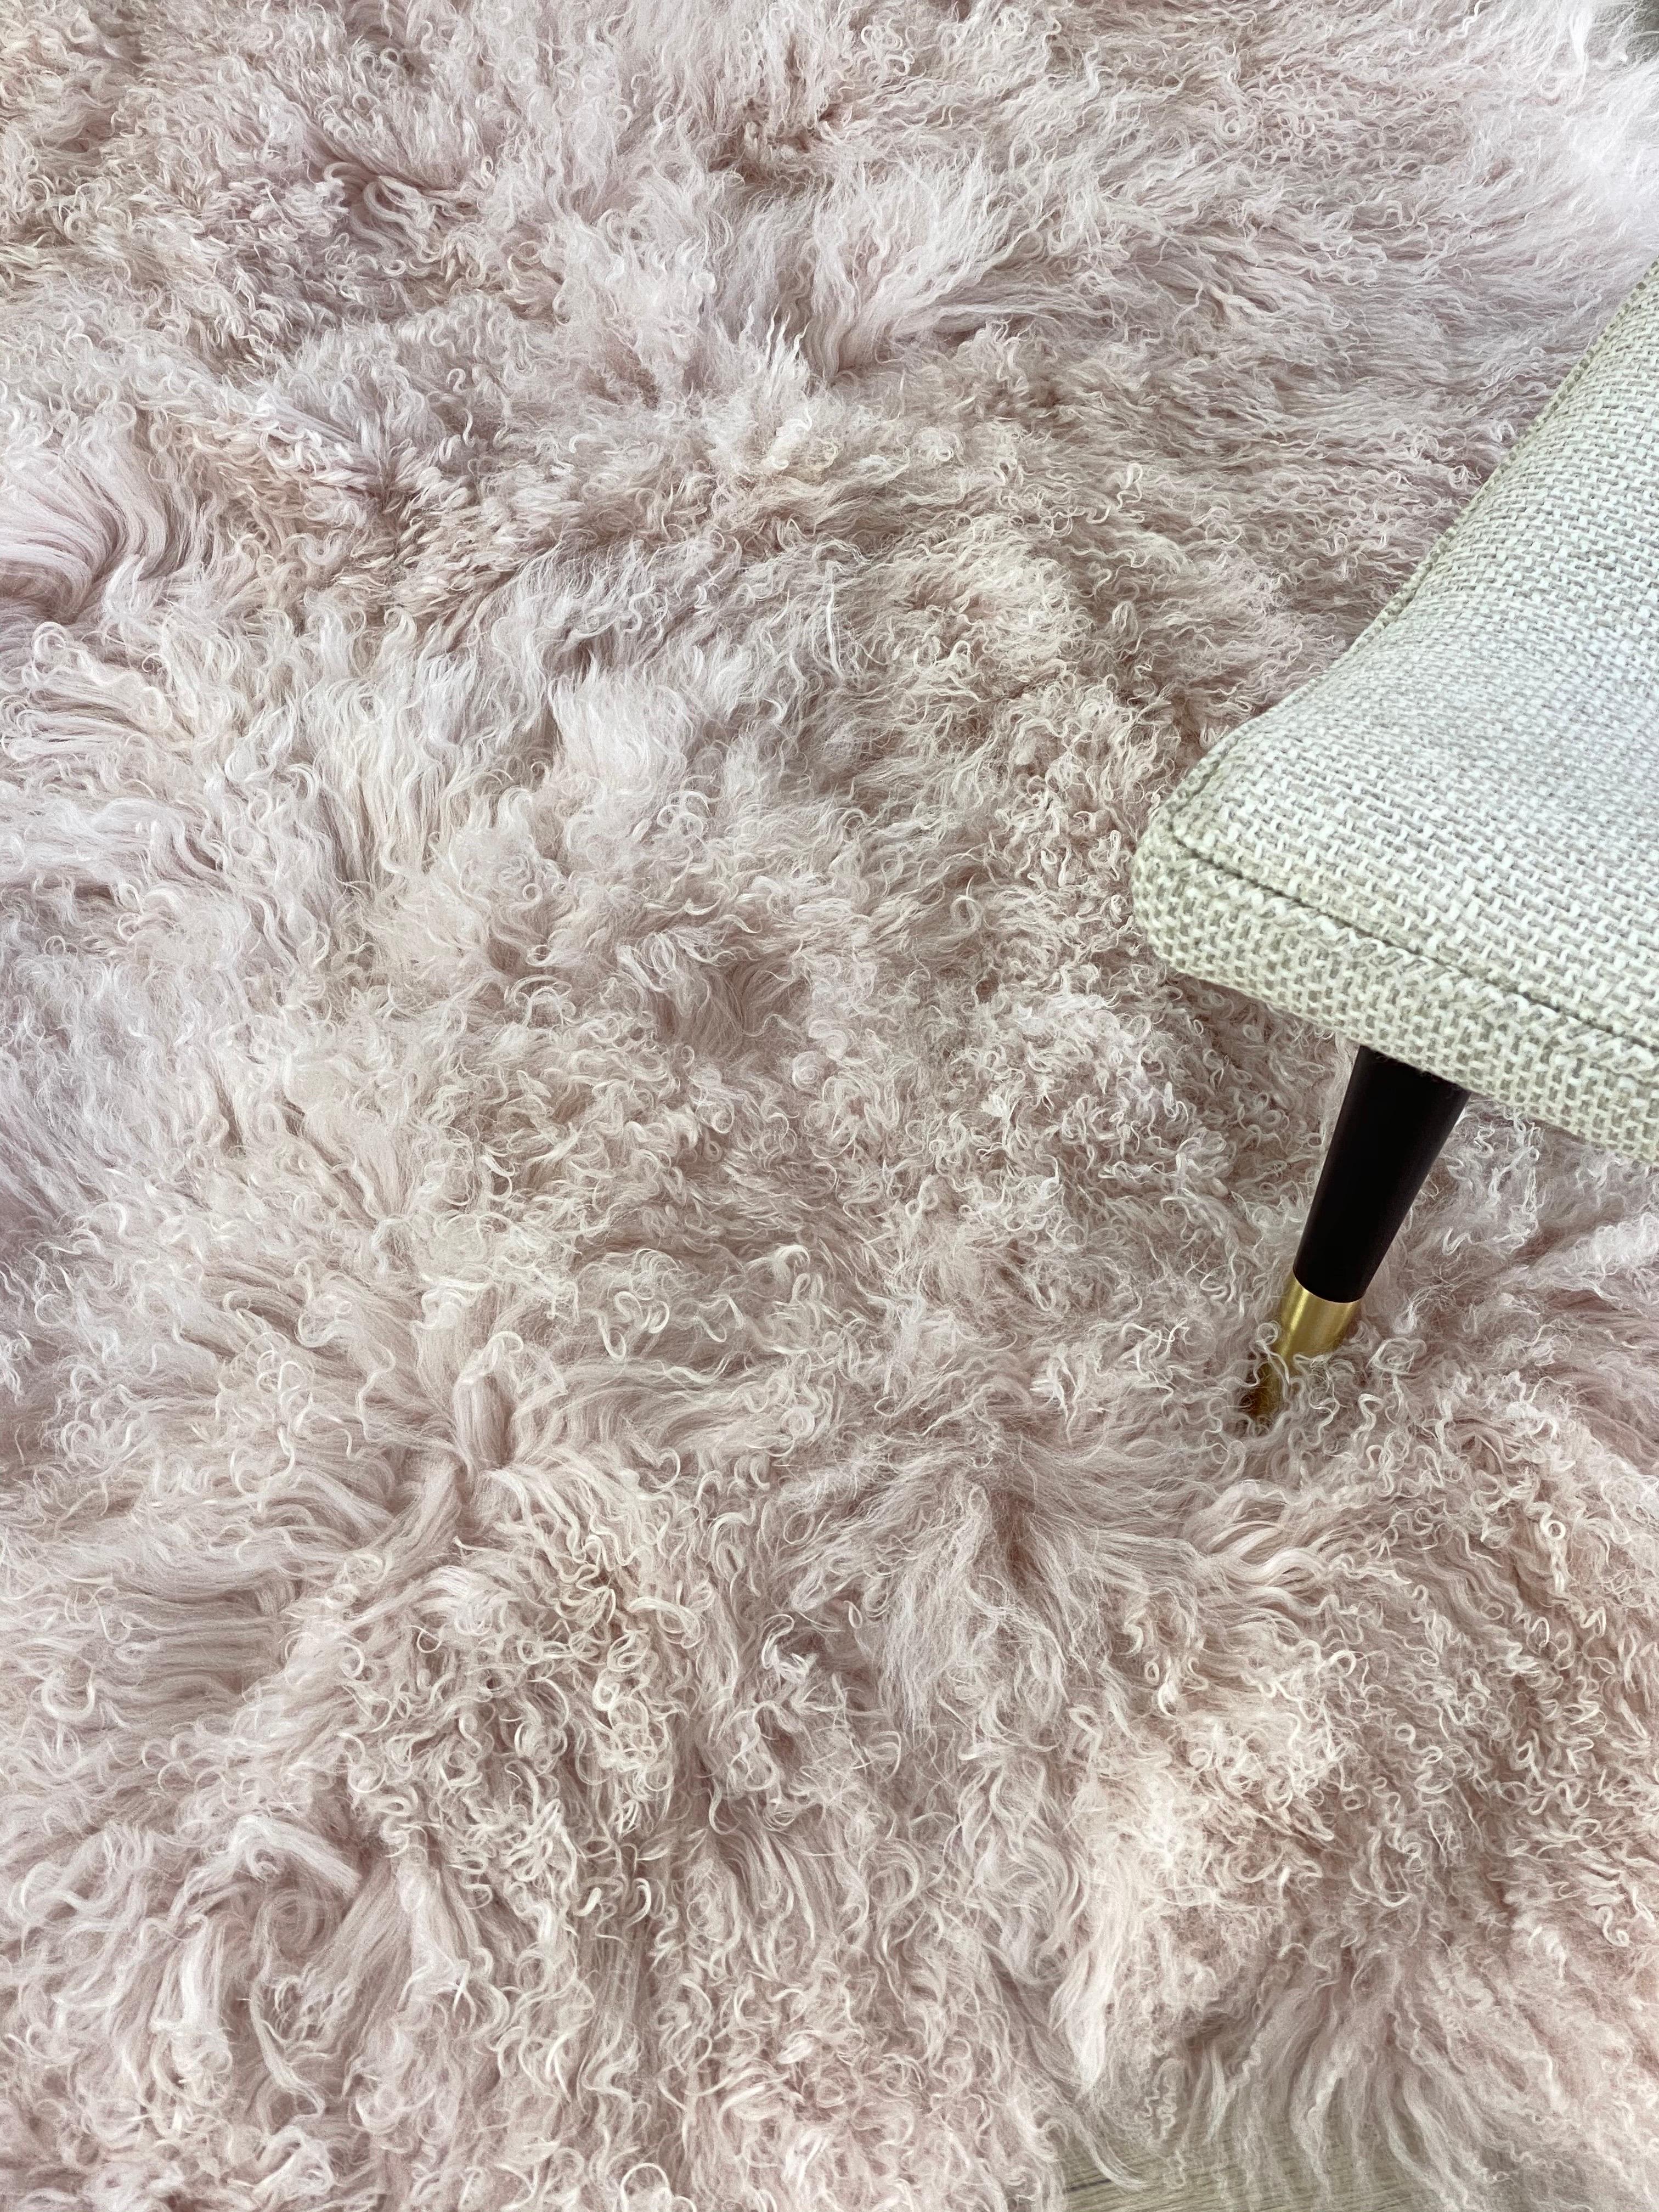 From gentle softness to sustainable design, this enchanting Mongolian fur rug translates modern and stylish design paralleled with an expression of natural signature living. 

Featured in a beautiful blush pink color, enhancing the irresistibly